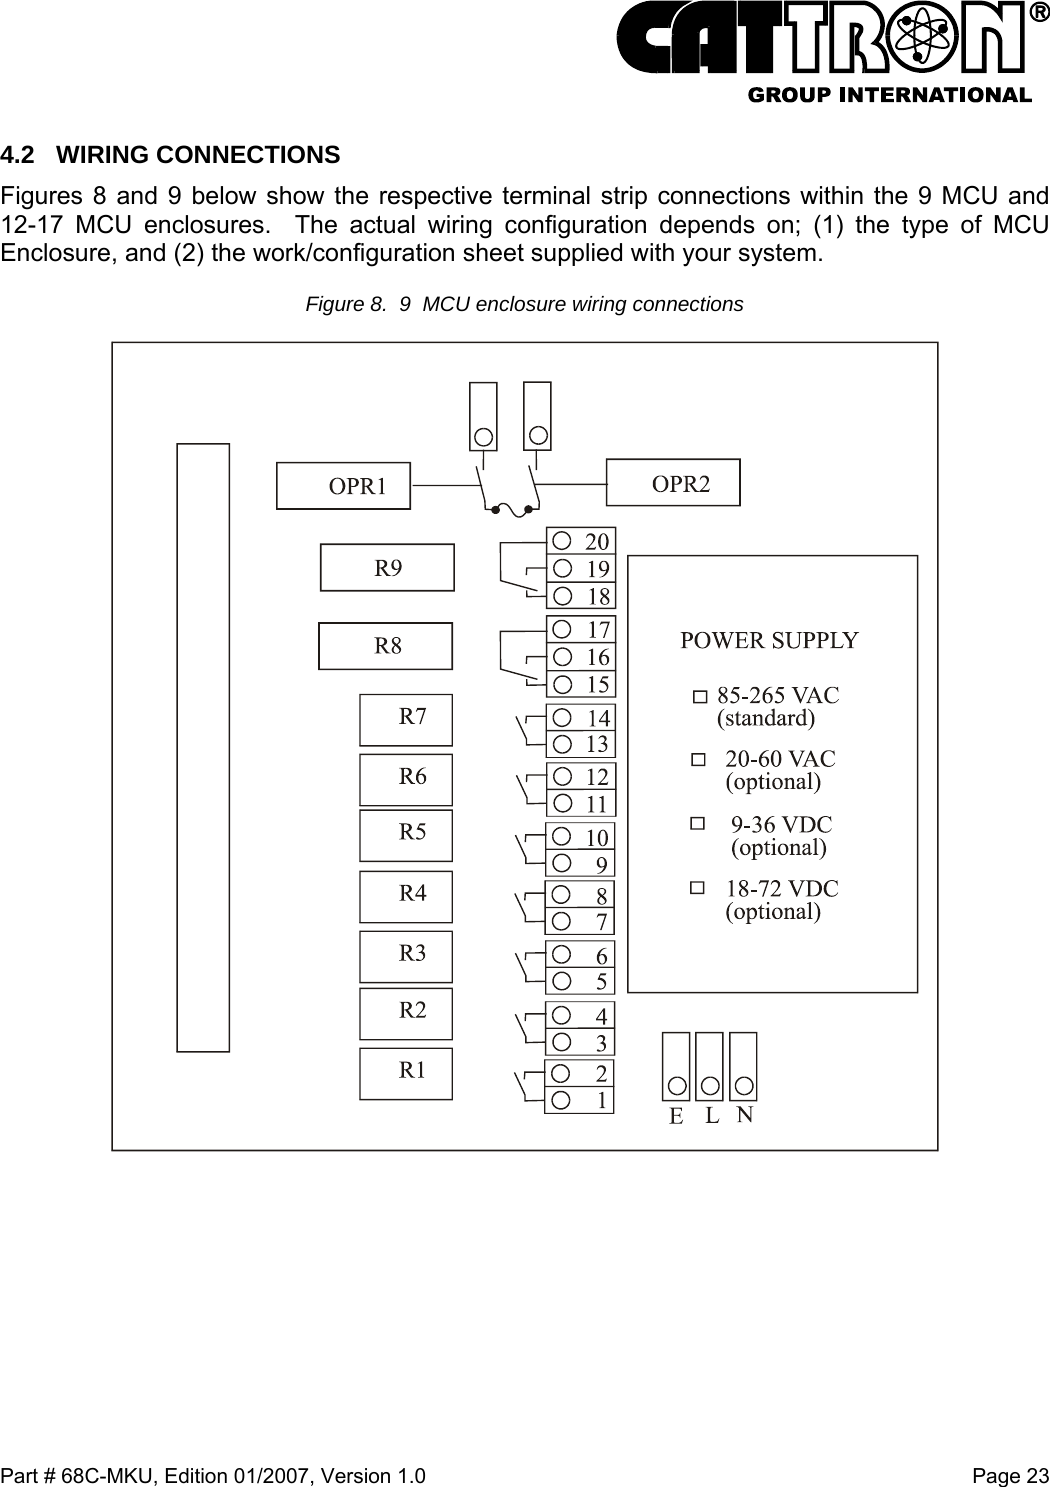  Part # 68C-MKU, Edition 01/2007, Version 1.0  Page 23   4.2 WIRING CONNECTIONS Figures 8 and 9 below show the respective terminal strip connections within the 9 MCU and 12-17 MCU enclosures.  The actual wiring configuration depends on; (1) the type of MCU Enclosure, and (2) the work/configuration sheet supplied with your system. Figure 8.  9  MCU enclosure wiring connections  